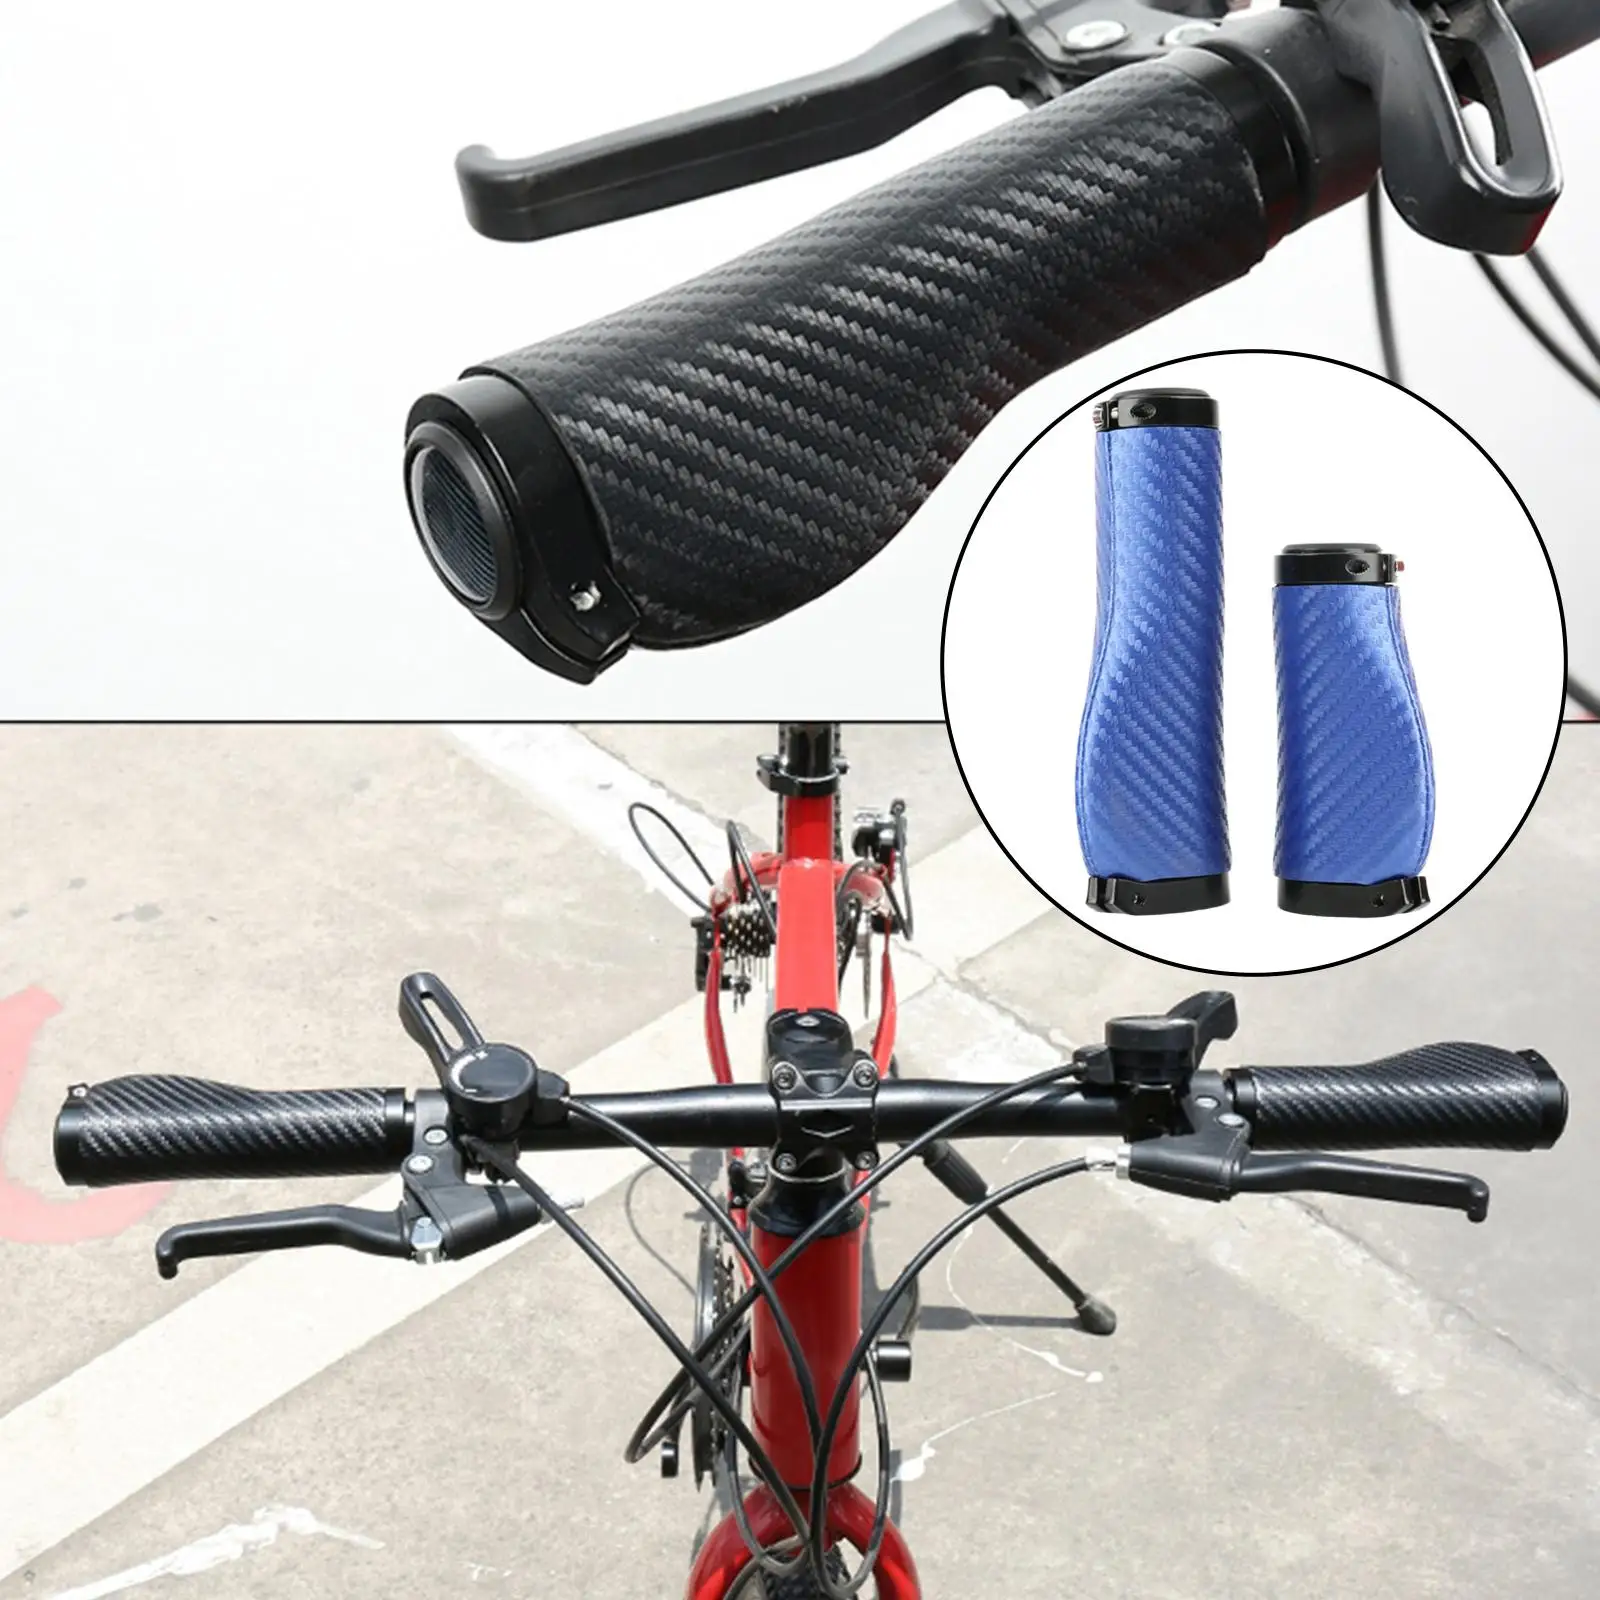 2x Universal Bicycle Handlebar Grips Lockable Anti Skid Bar Grips for Scooter Road Bike E Bike Cycling Parts Shock Absorption